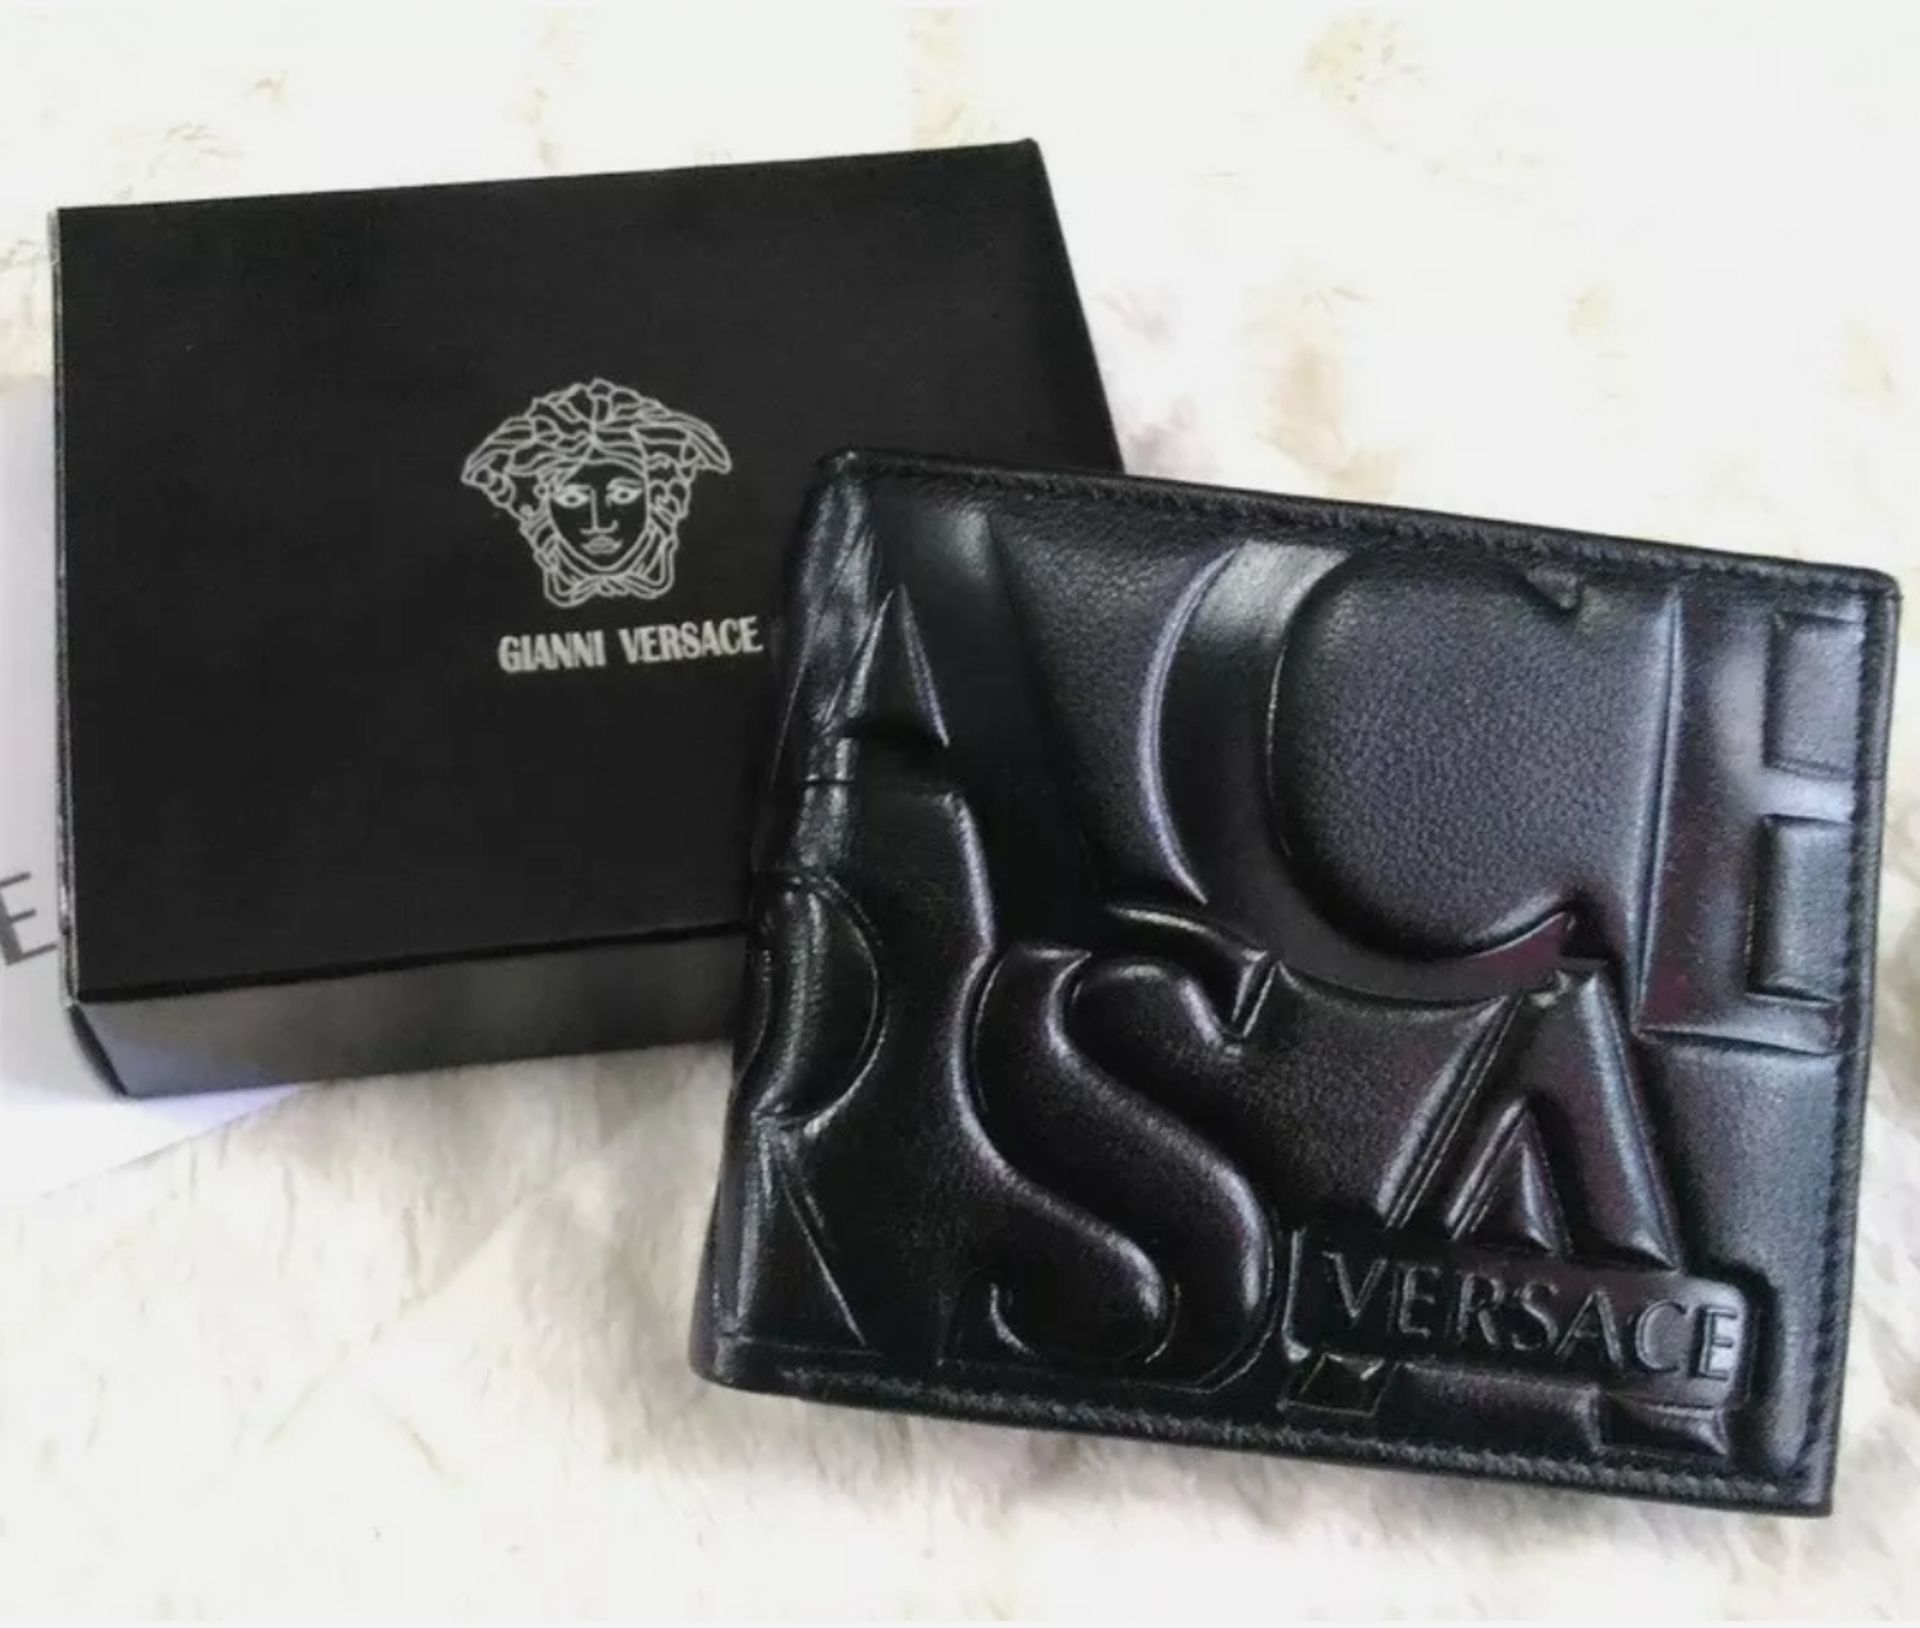 versace men's leather wallet - new with box - Image 3 of 7